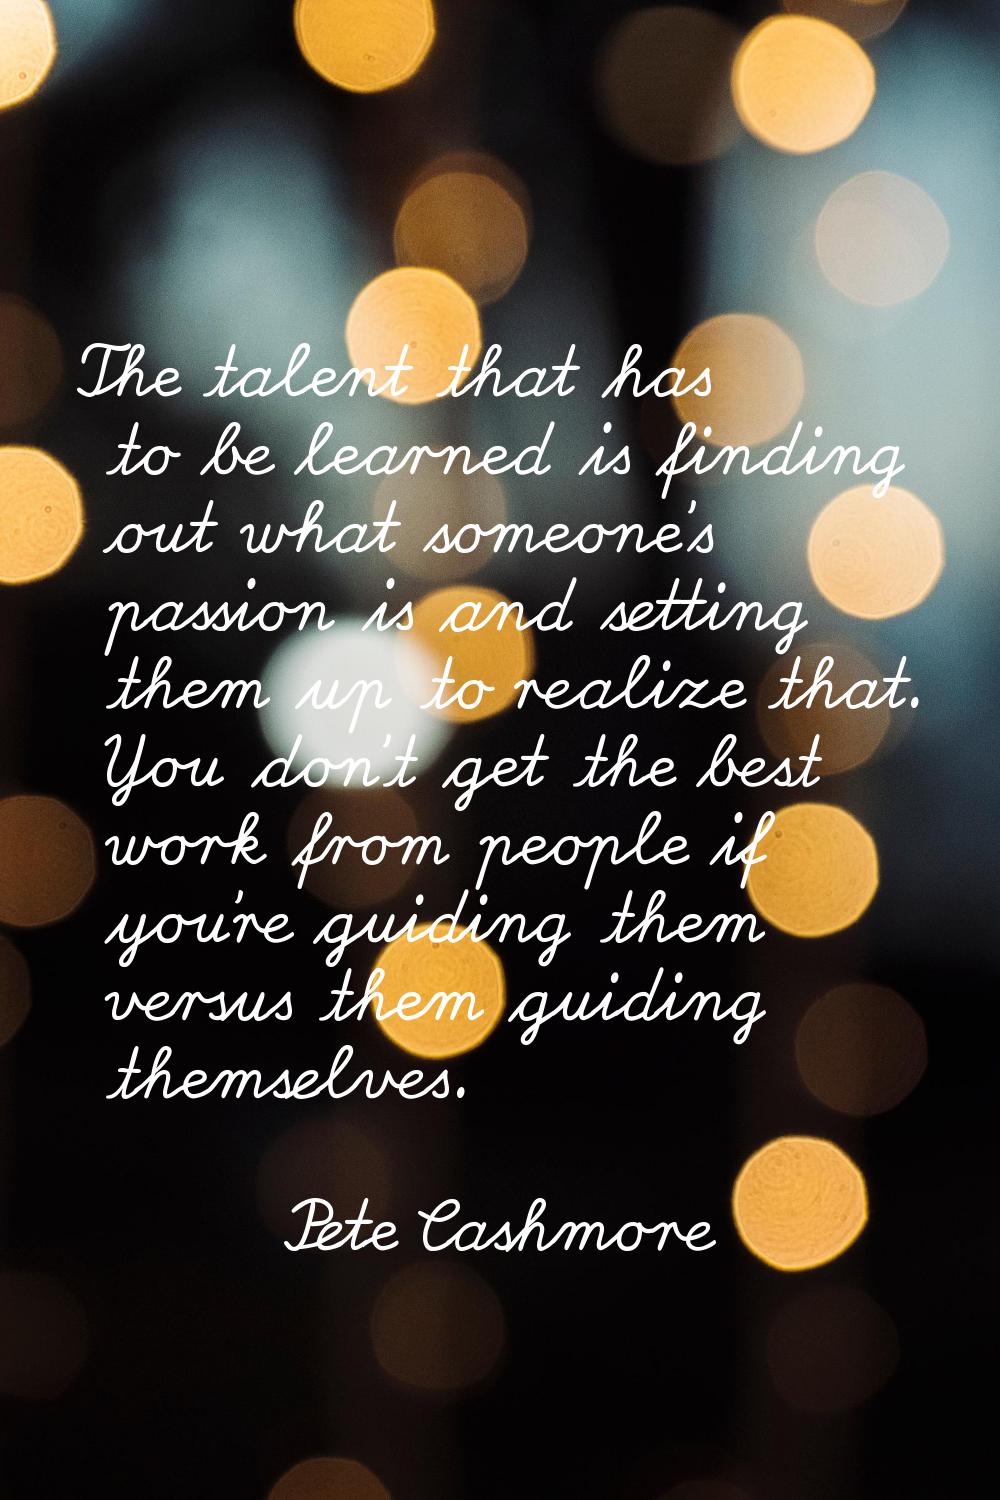 The talent that has to be learned is finding out what someone's passion is and setting them up to r